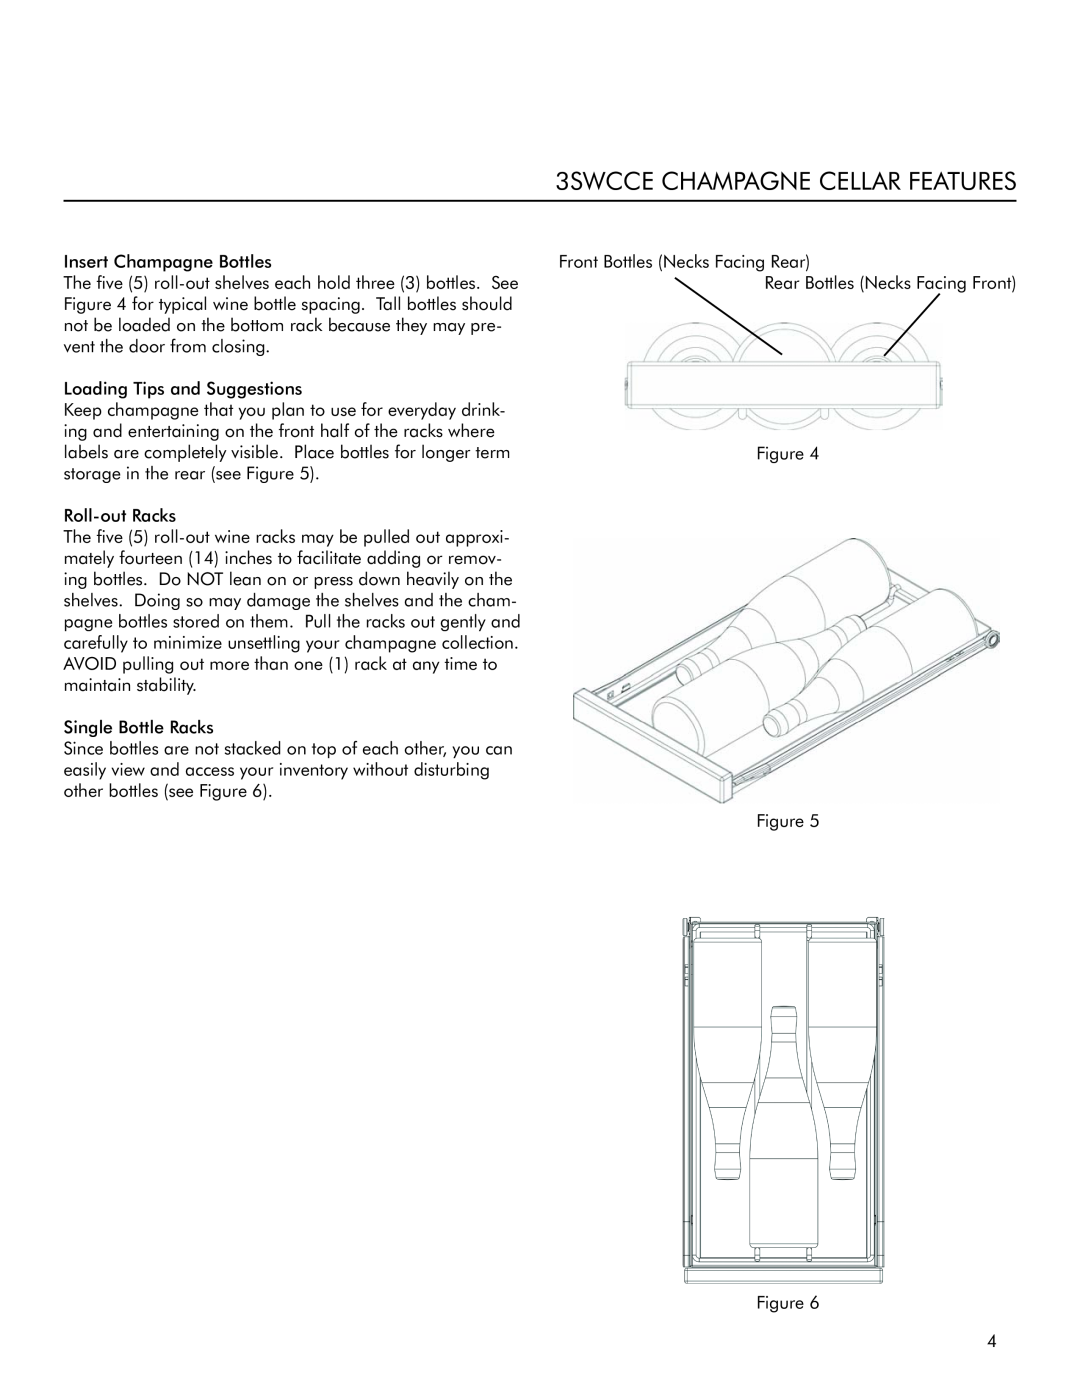 Marvel Industries manual 3SWCCE CHAMPAGNE CELLAR FEATURES 